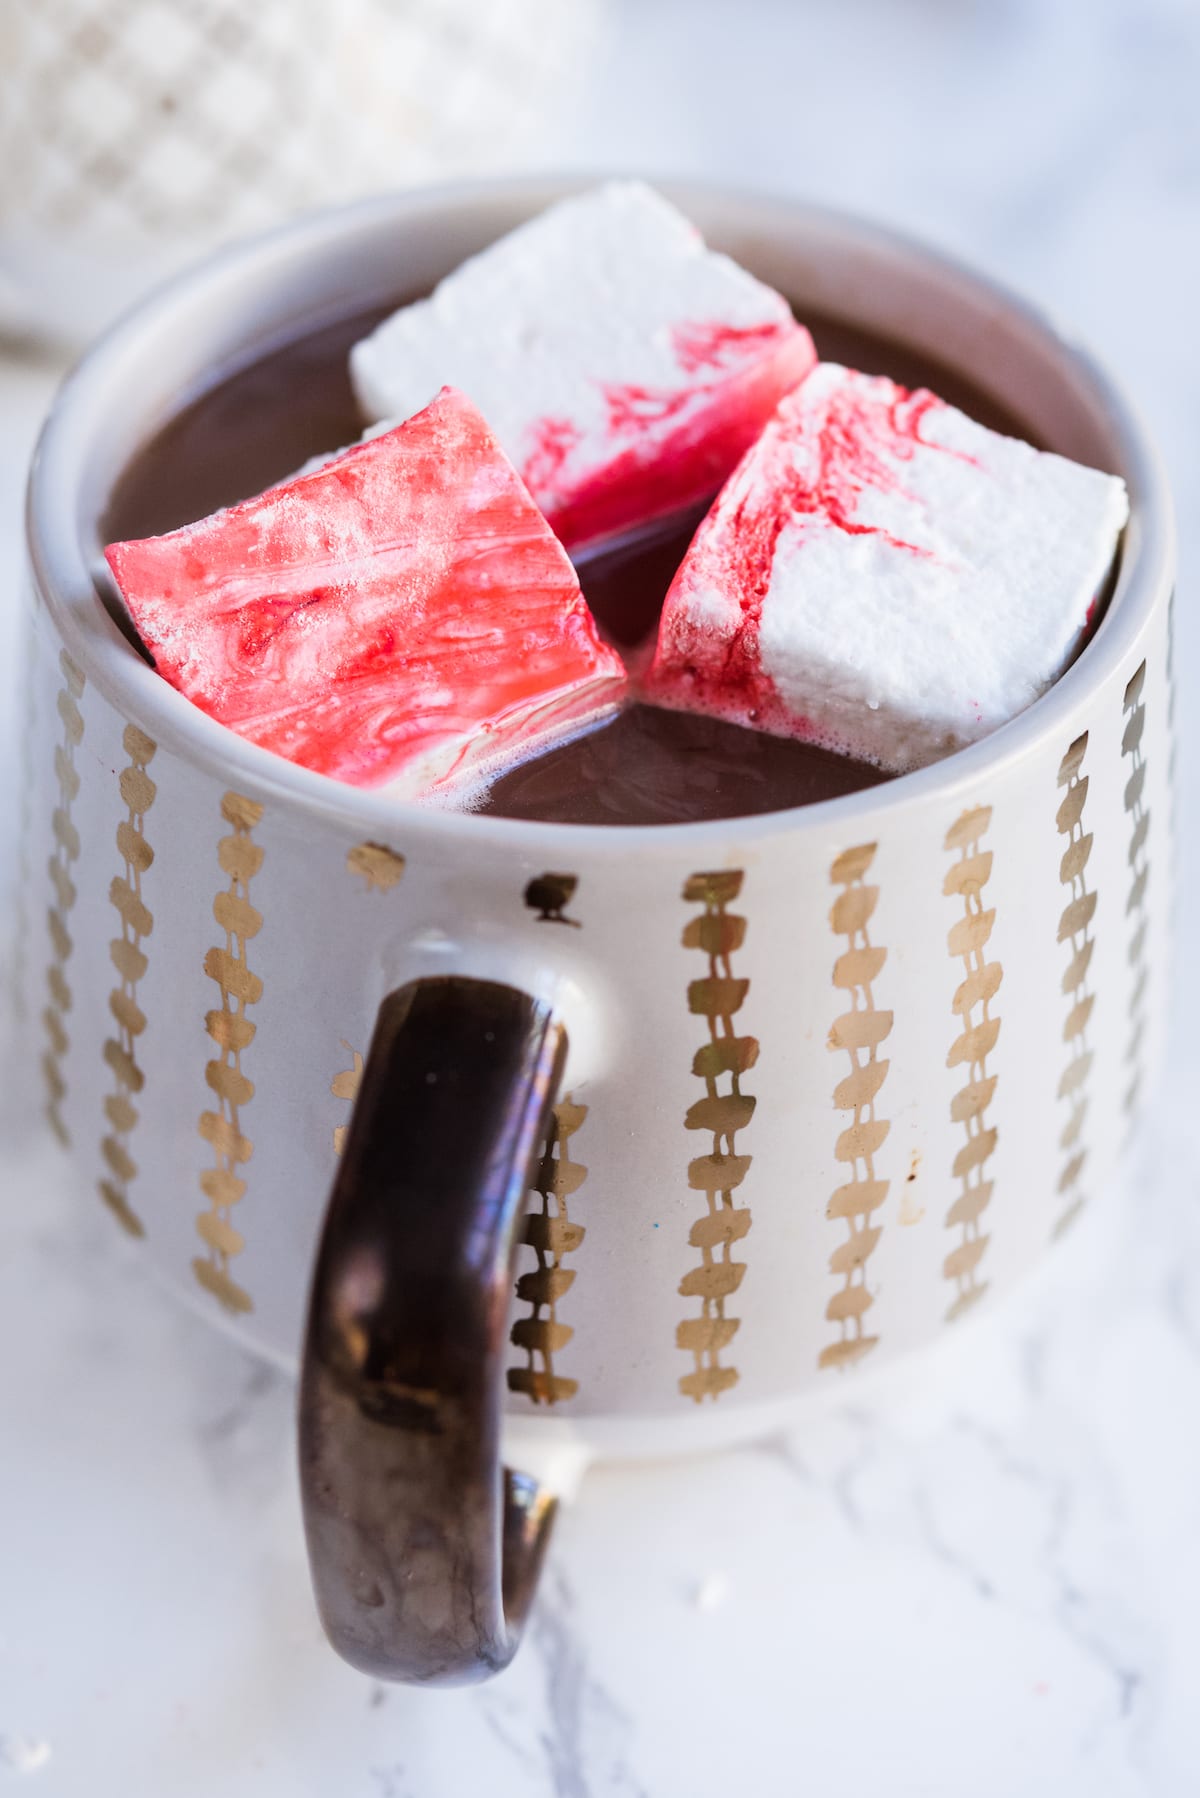 How to Make Homemade Marshmallows and a Peppermint Marshmallow Recipe | Christmas recipes, Christmas party ideas, entertaining tips and more from entertaining blog @cydconverse